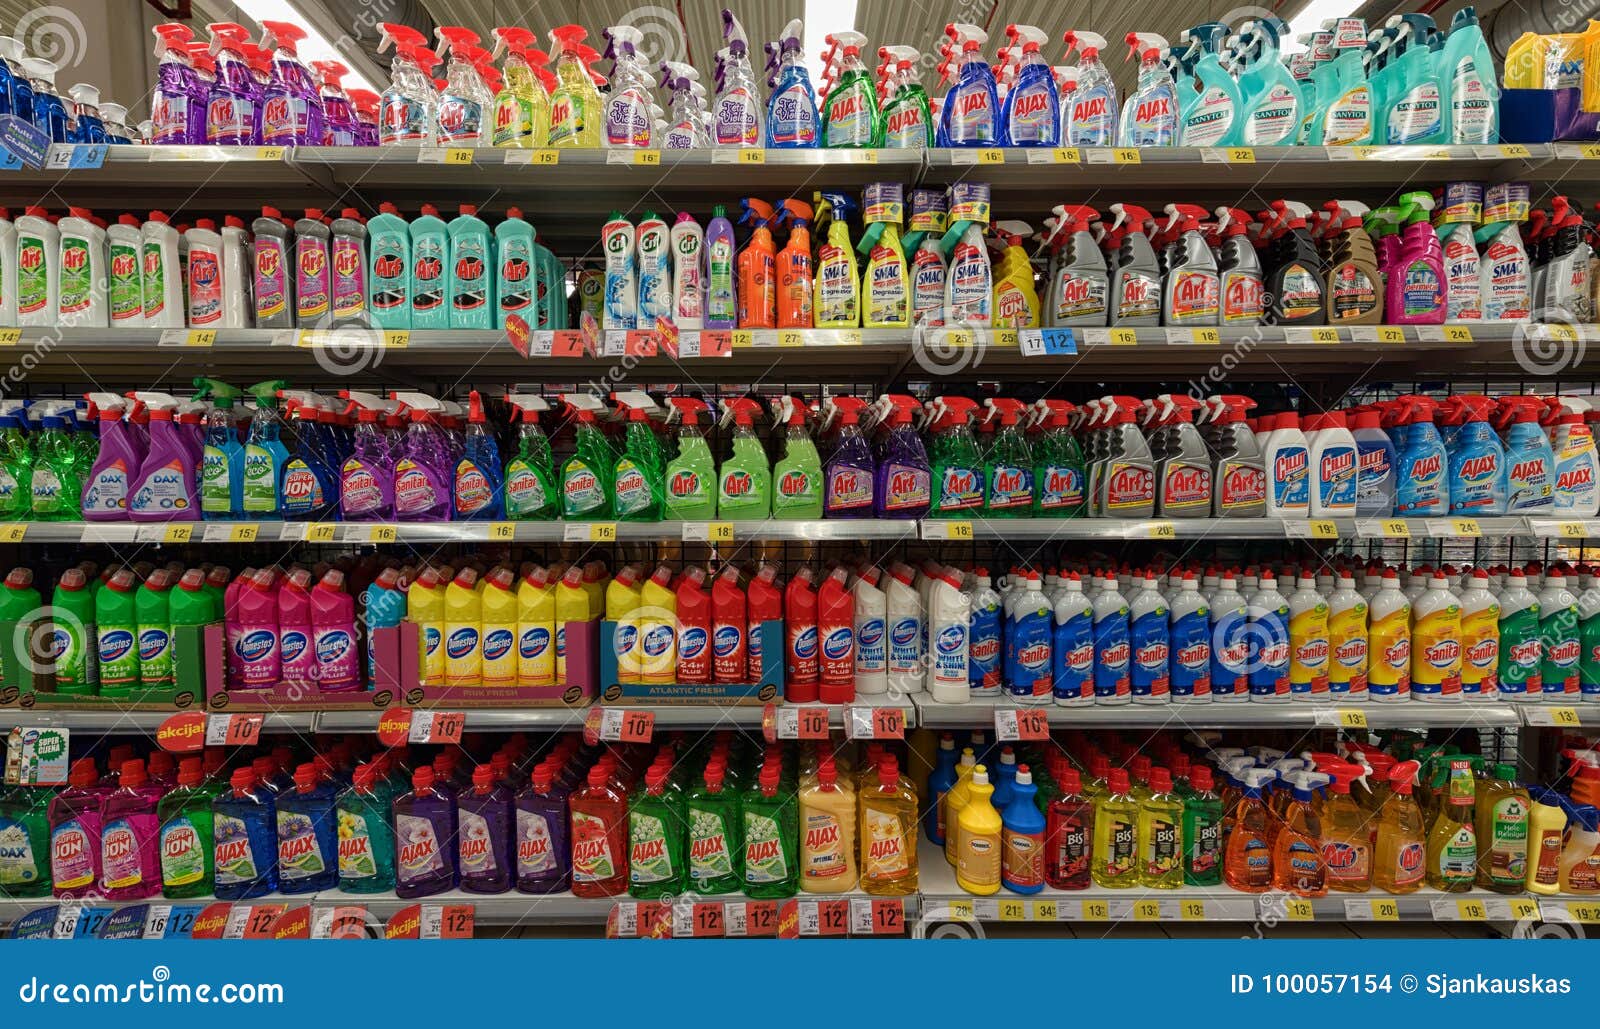 Division Household Goods For House Cleaning In The Supermarket Stock Photo,  Picture and Royalty Free Image. Image 37383613.